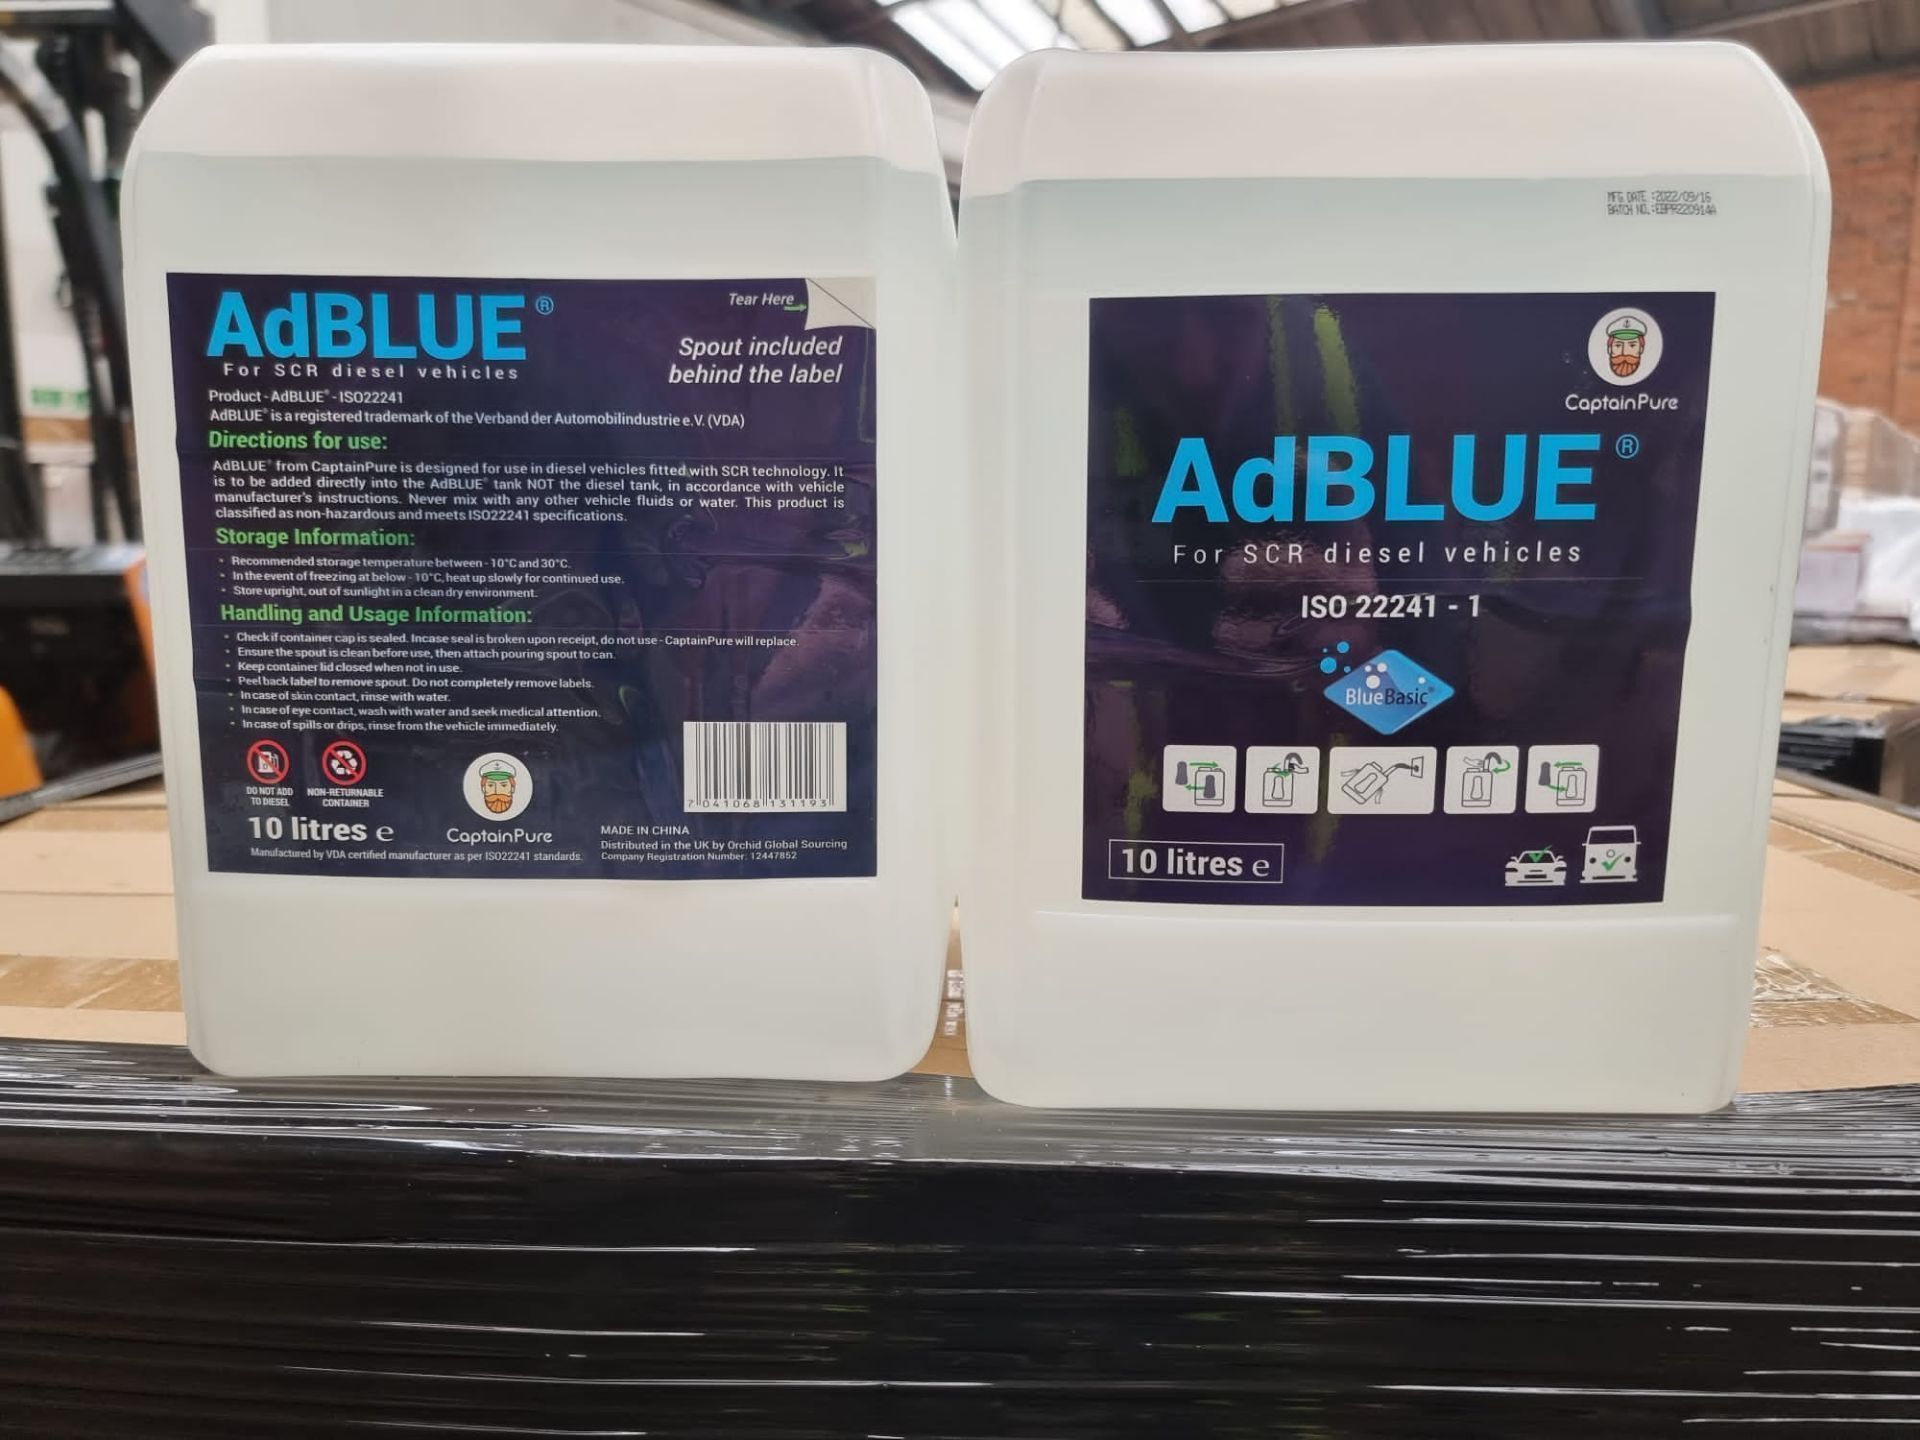 NEW SEALED 10L TUBS OF ADBLUE FOR DIESEL VEHICLES. INCLUDES NOZZLE. AdBlue is the registered